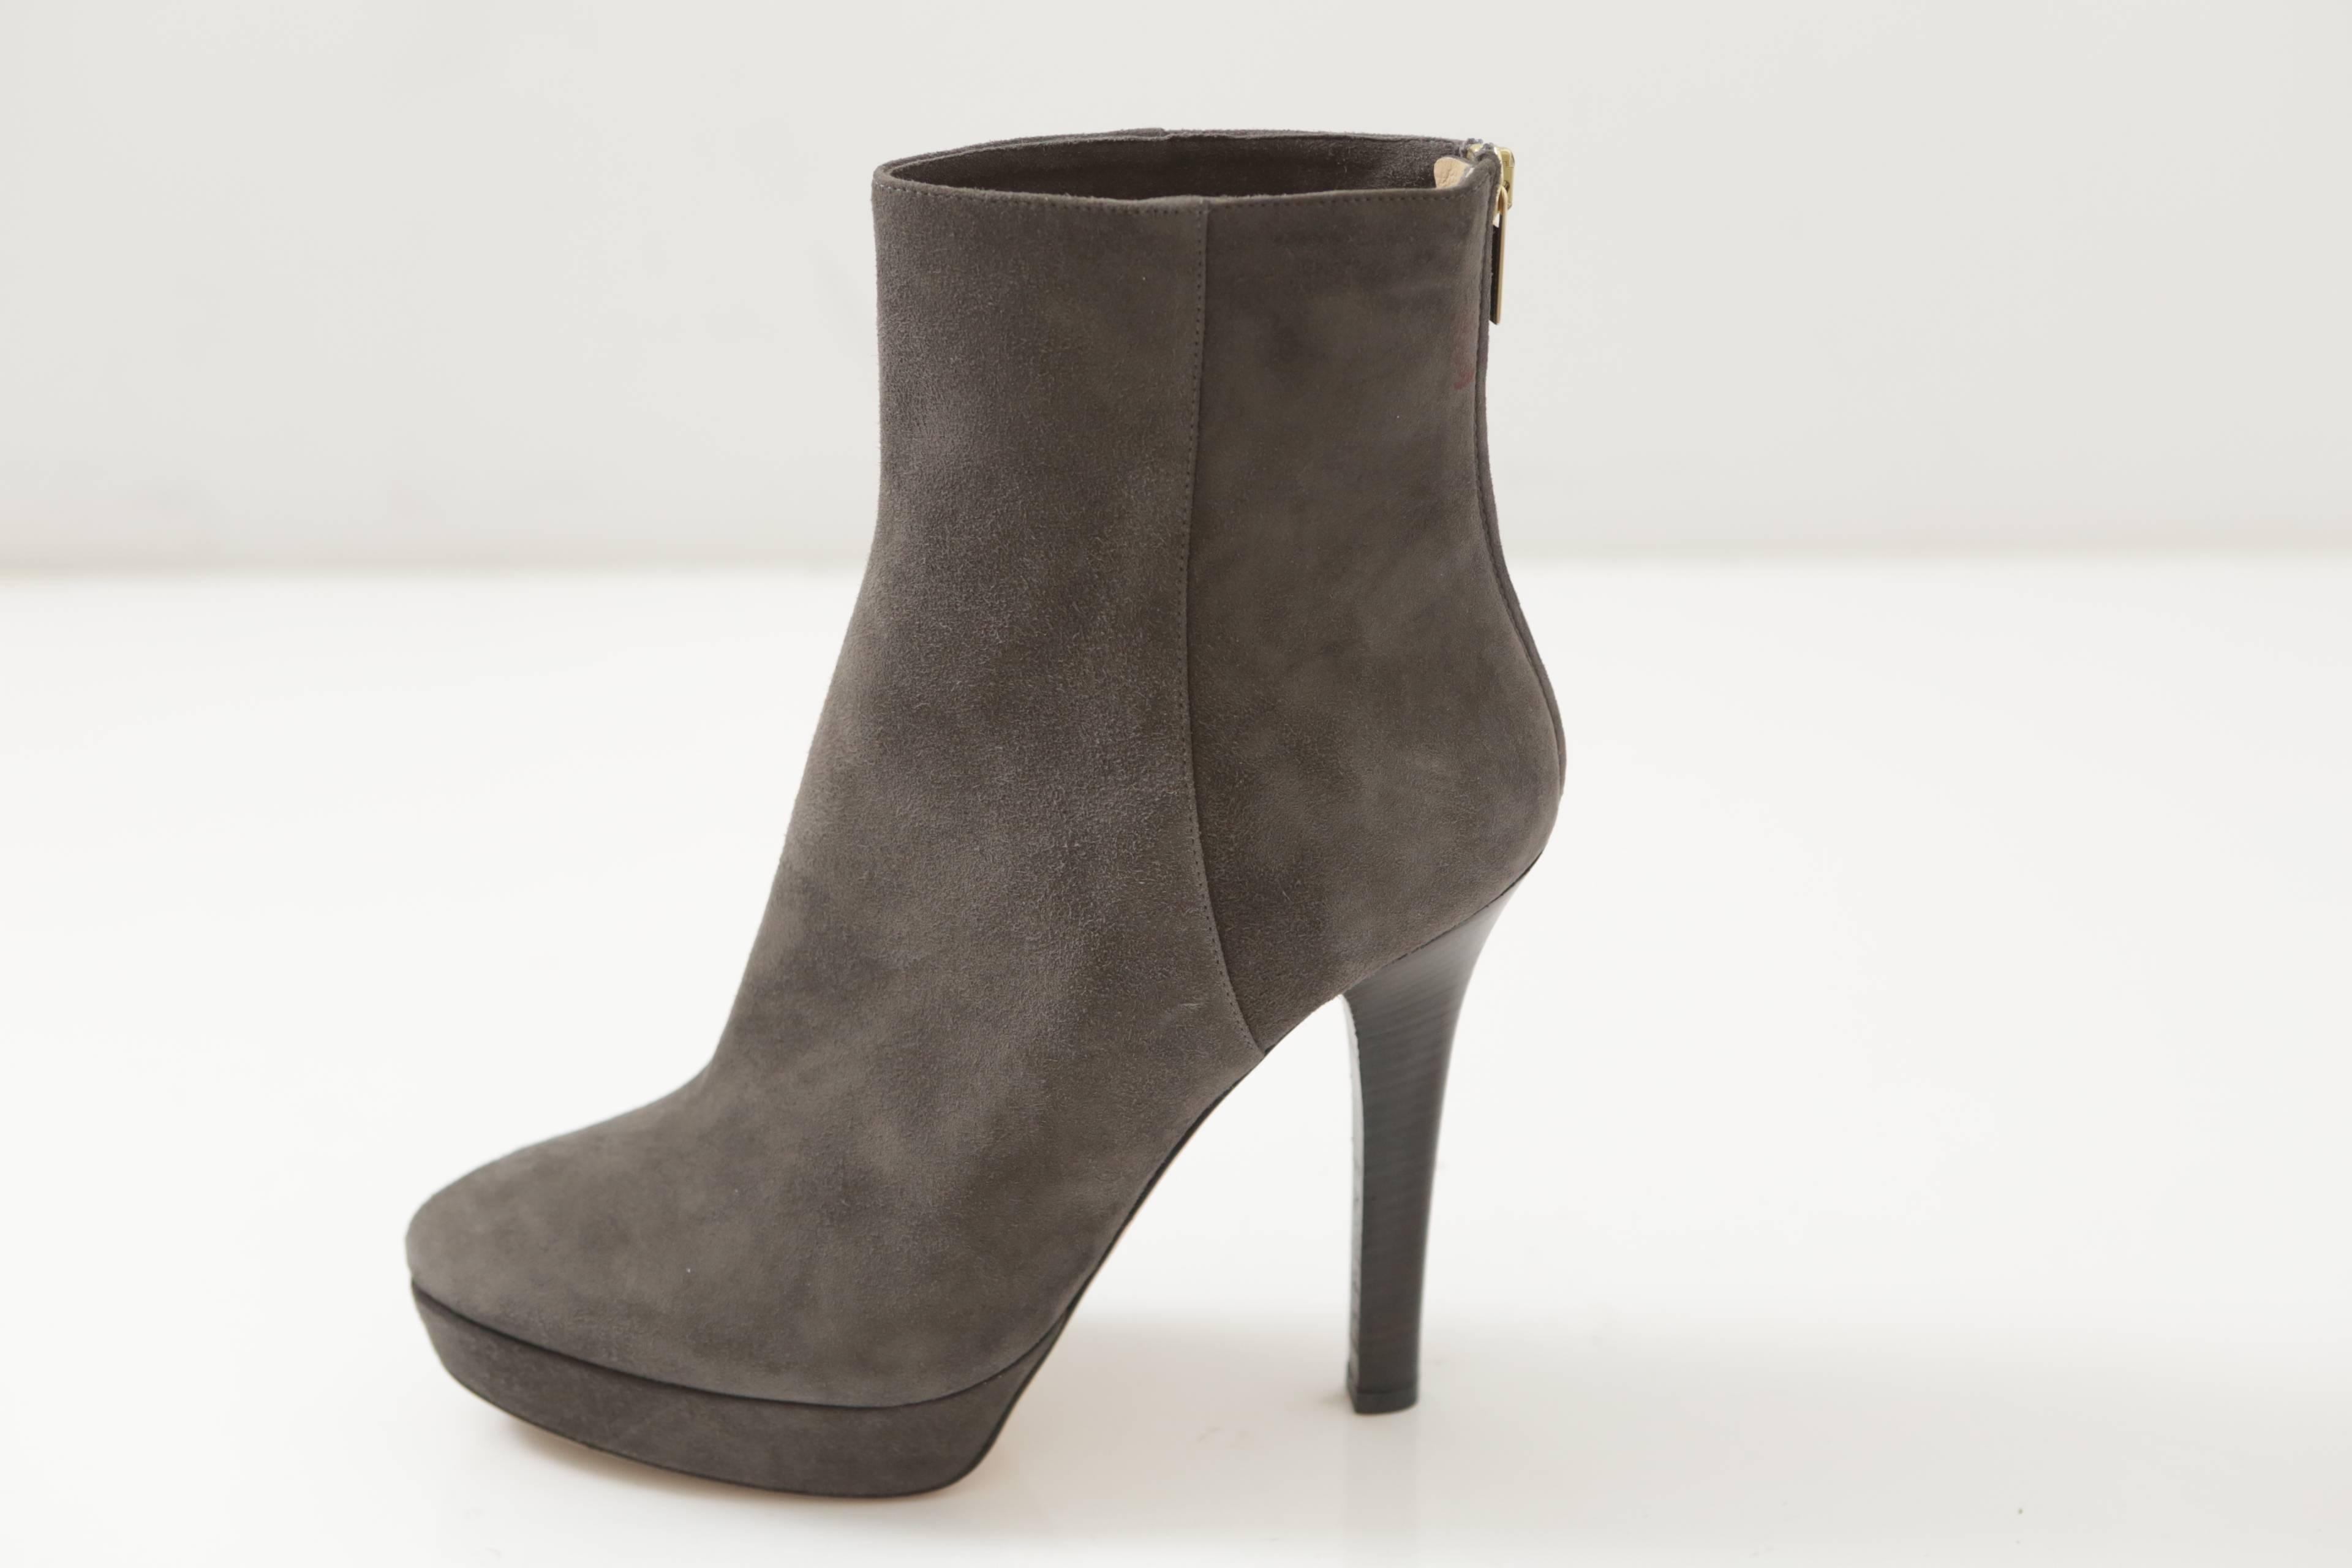 Classic ankle boot in grey suede with interior zip and gold hardware.